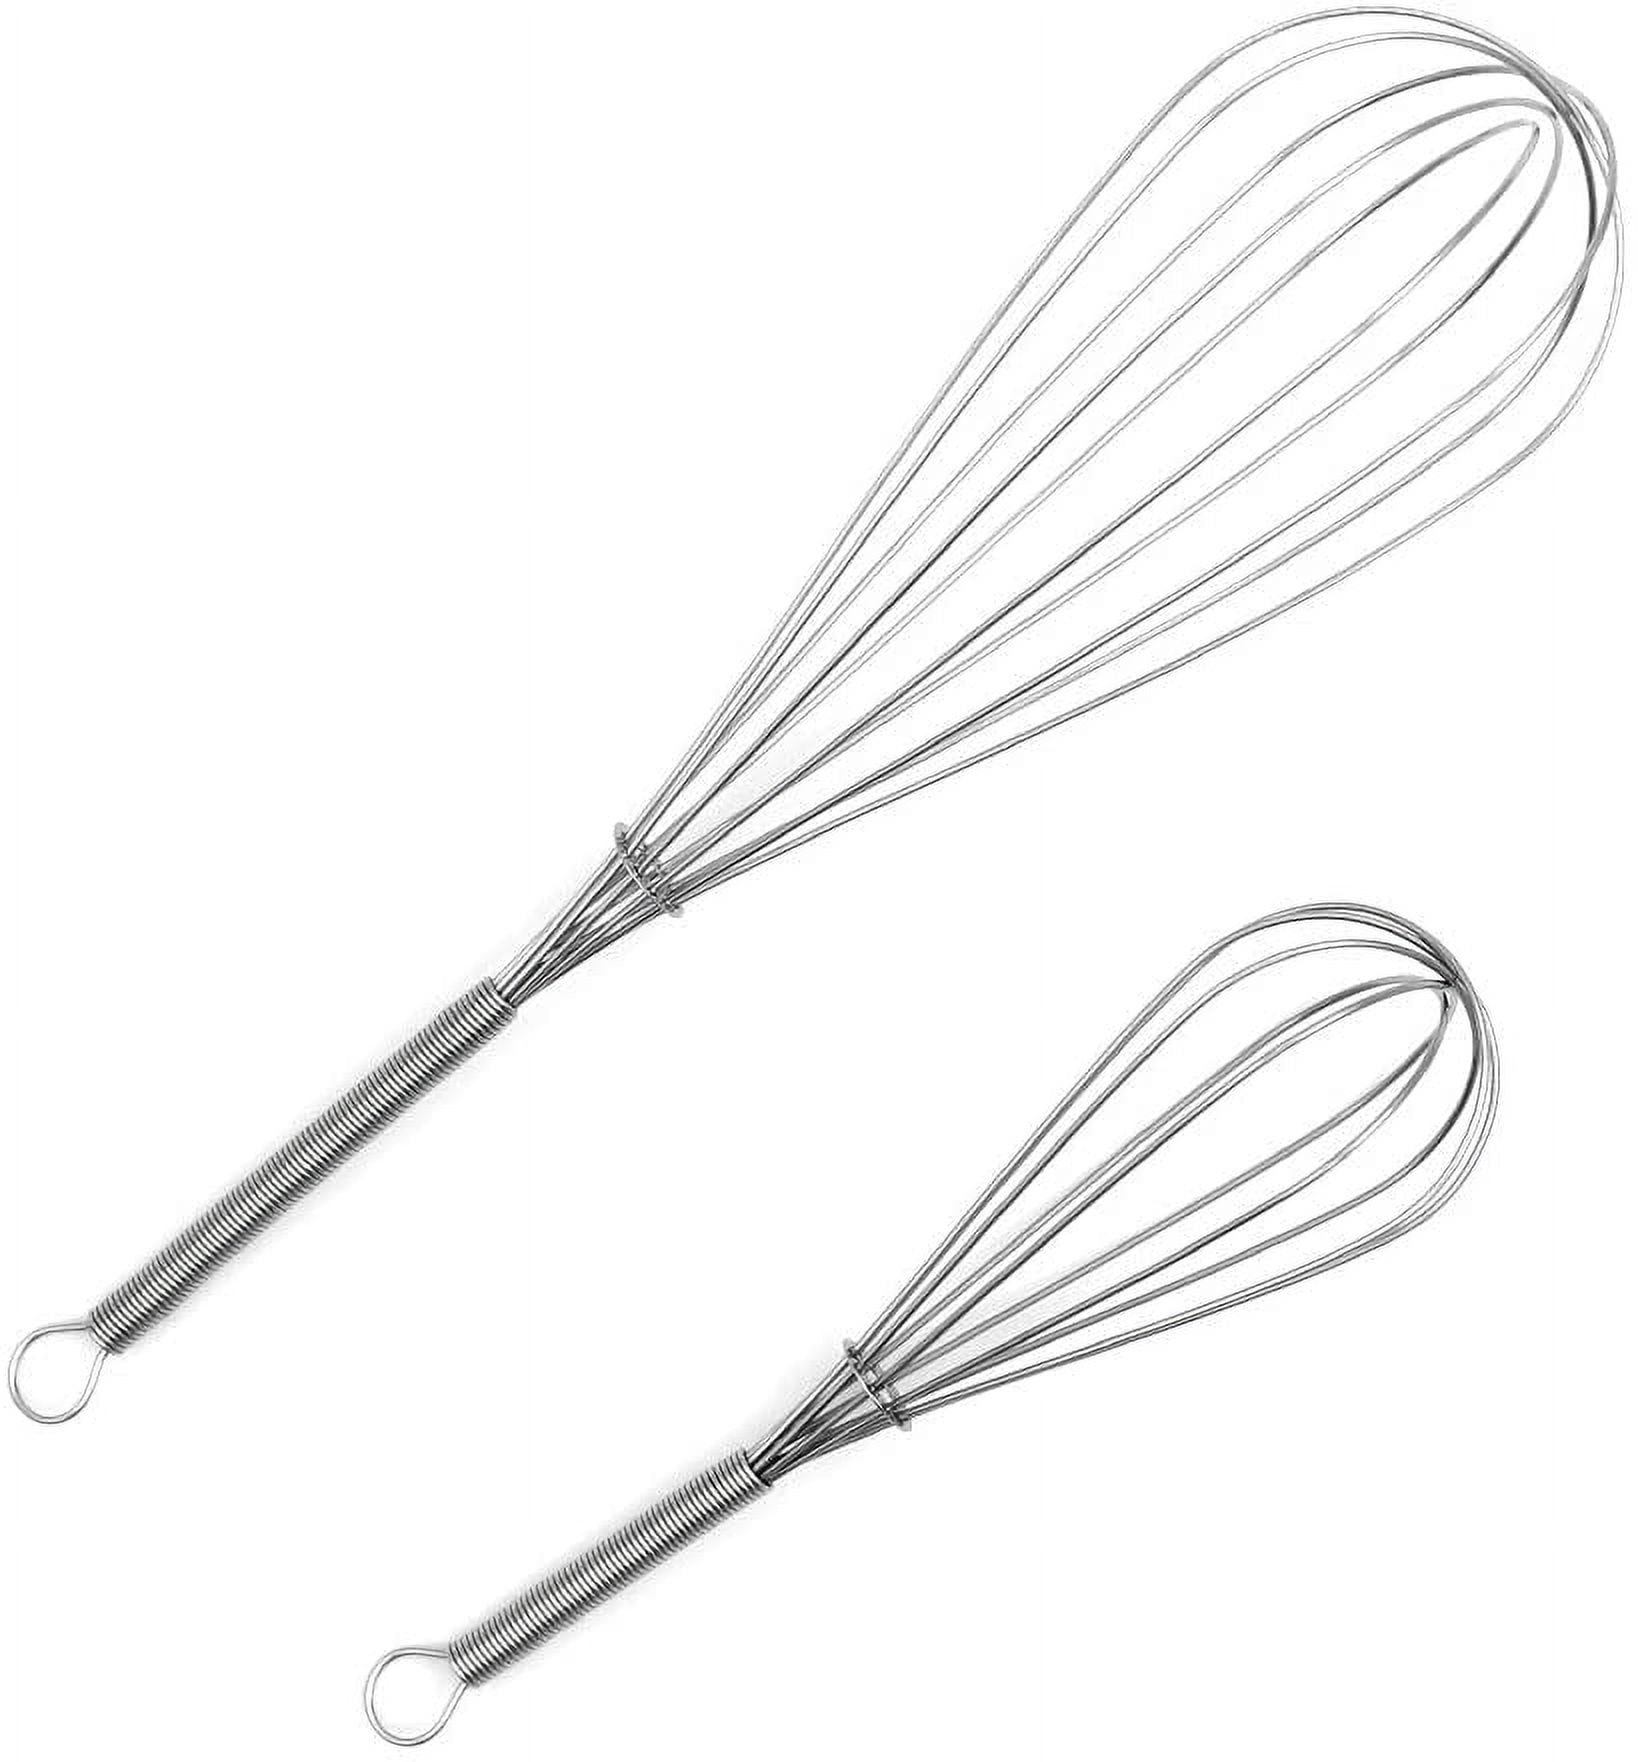  kitchen Wire Whip, Stainless Steel Spring Whisk, LightWeight  Manual Mixers, Portable Cream Egg Beater, Anti Rust Spring Egg Whisk,  Versatile Egg Mixing Tool, Durable Wire Whip for Cooking Whipping: Home 